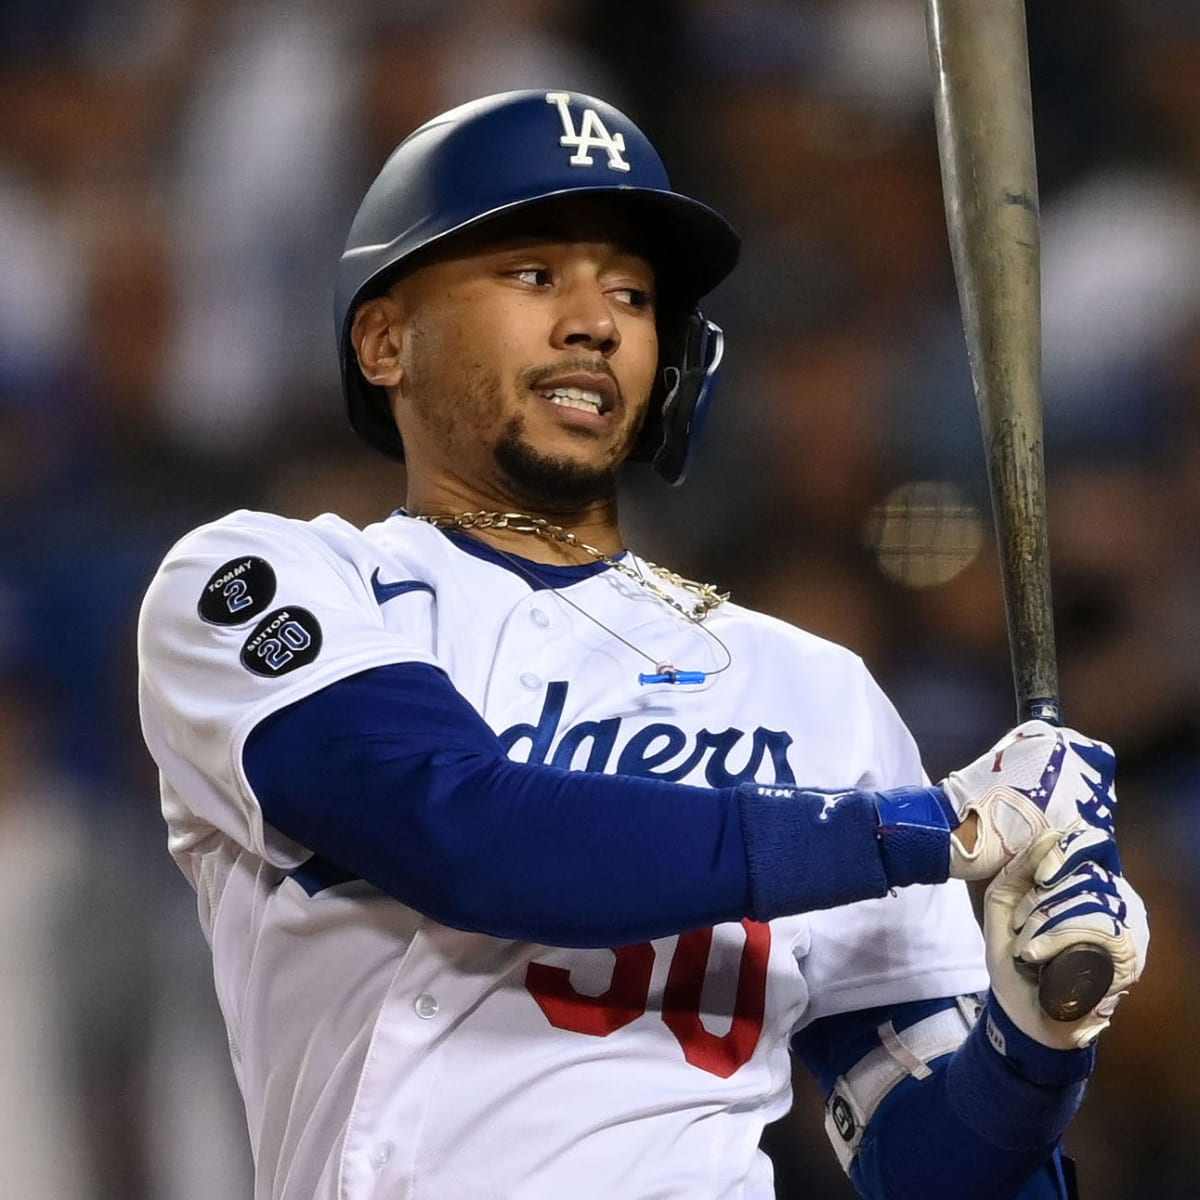 Mookie Betts hits 2 HRs as Dodgers beat Marlins 3-1 to complete